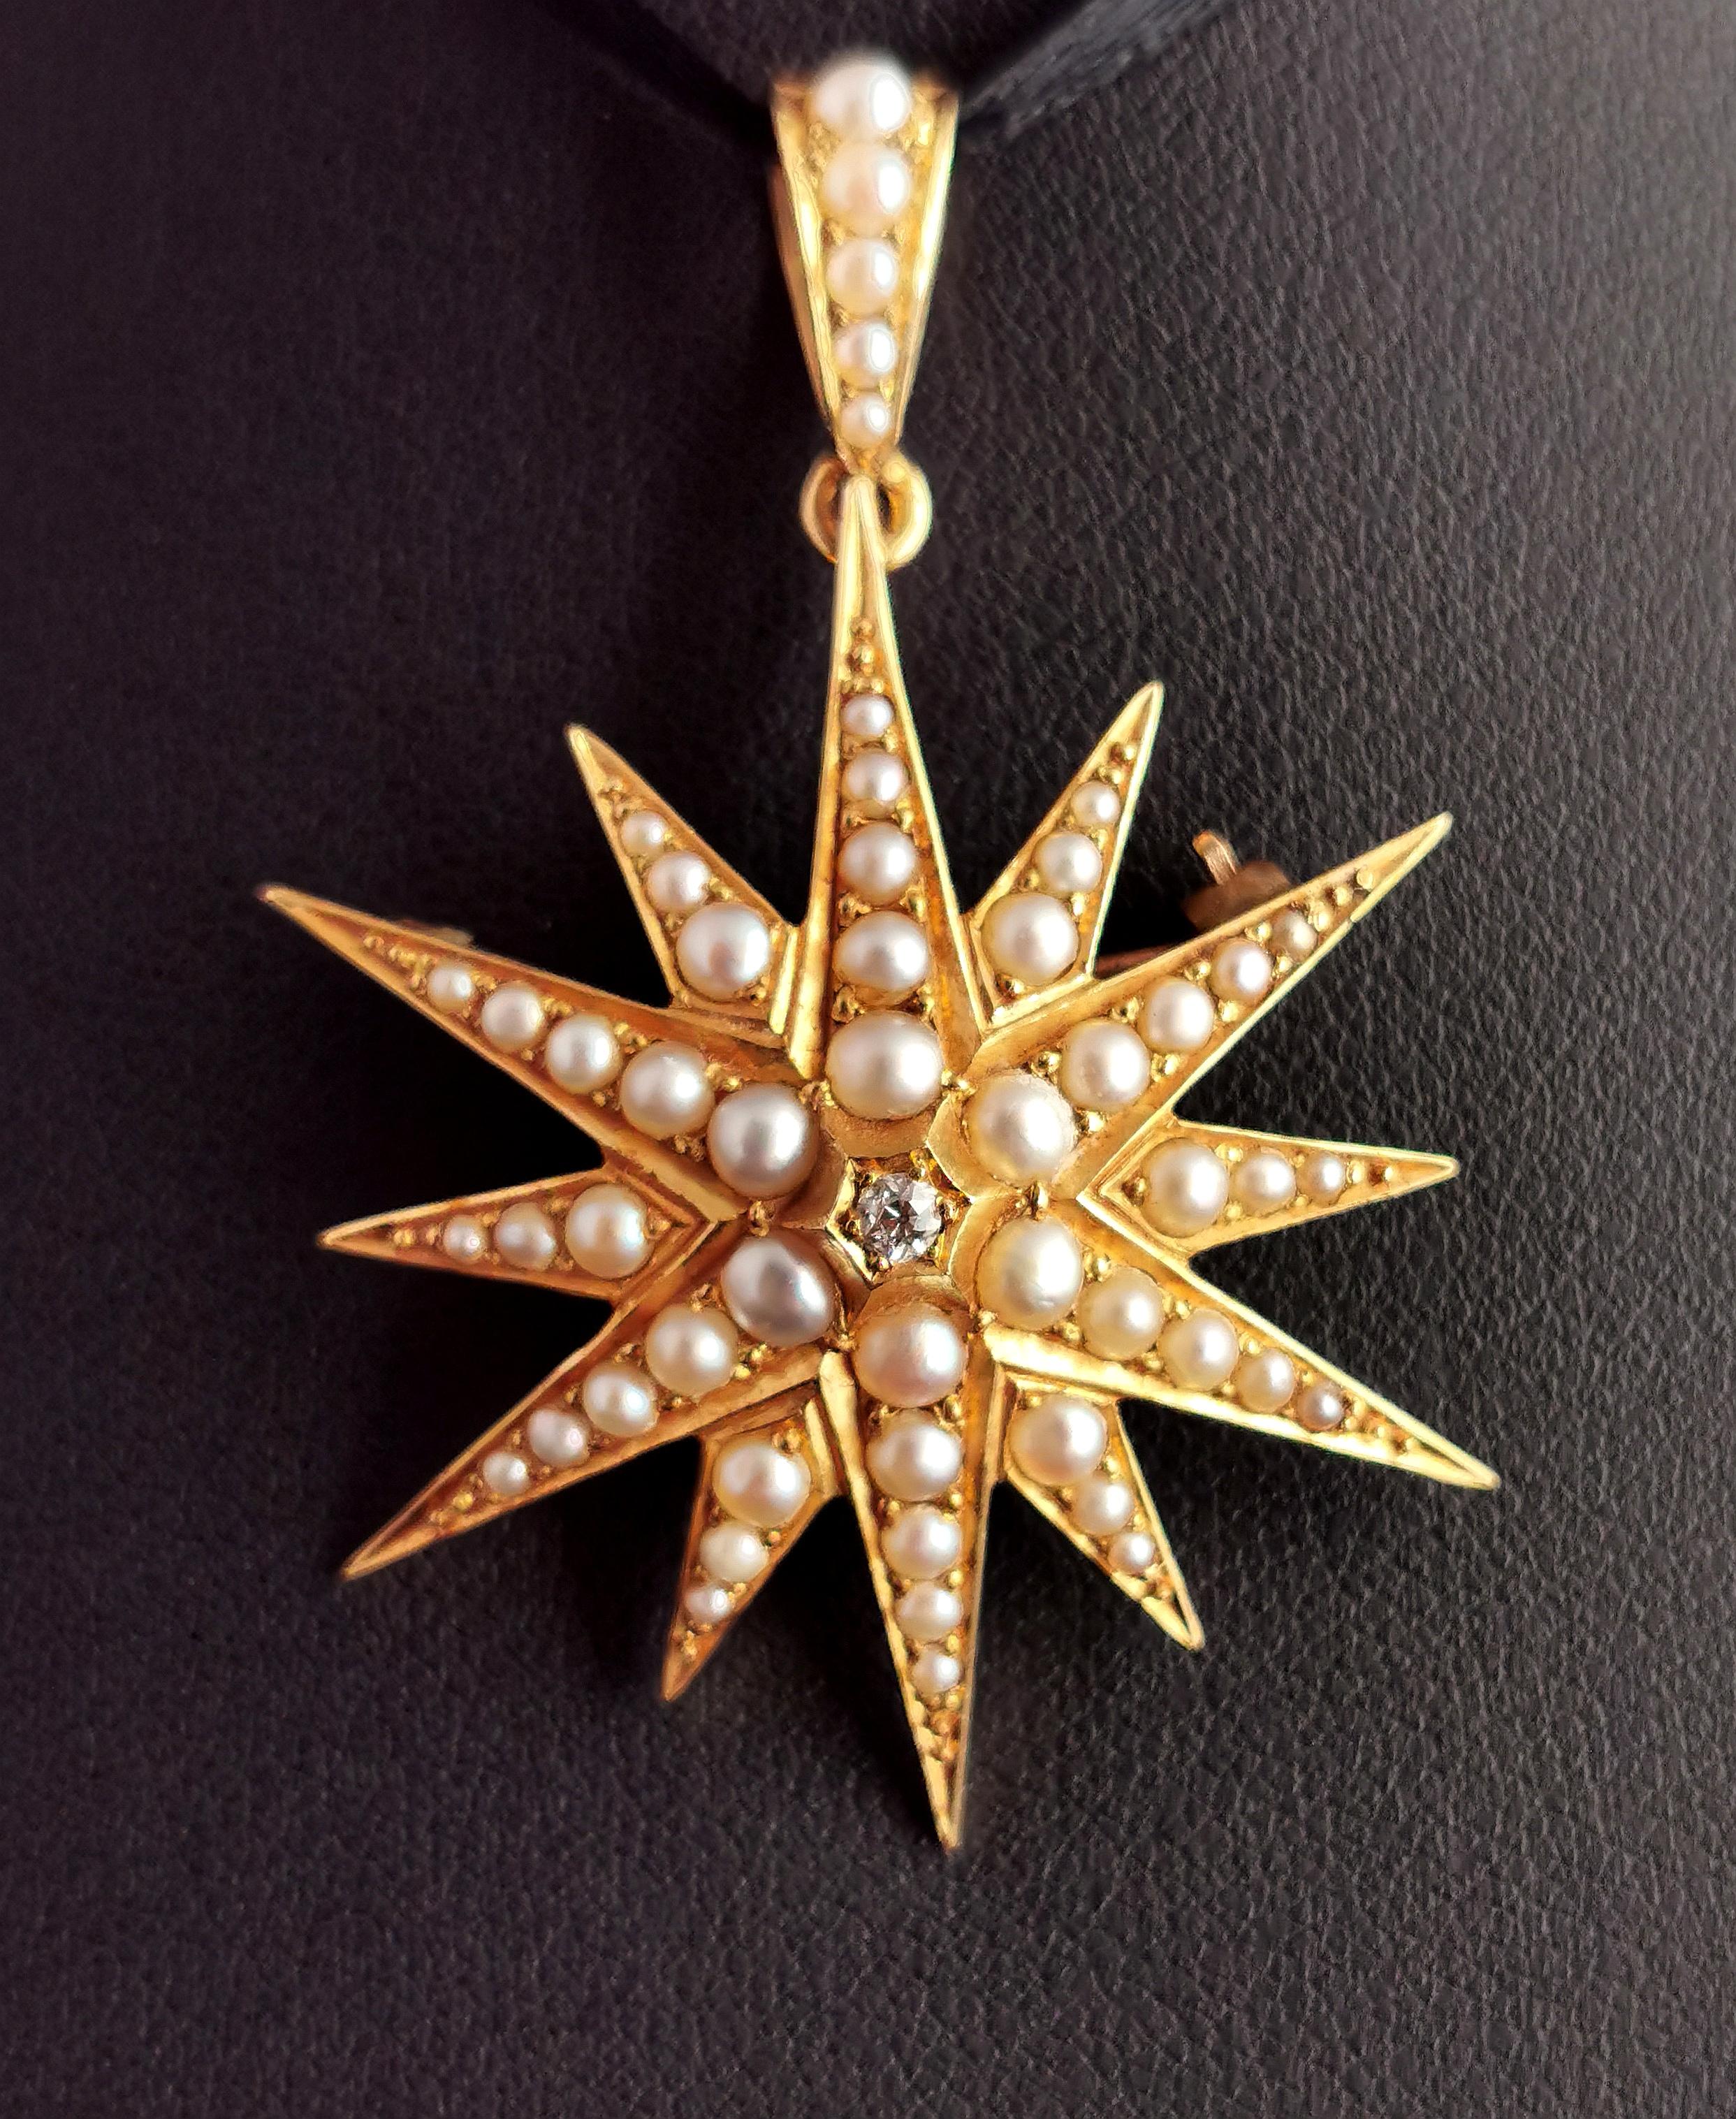 Antique Pearl and Diamond Star Pendant Brooch, 18k Yellow Gold, Victorian, Boxed 8